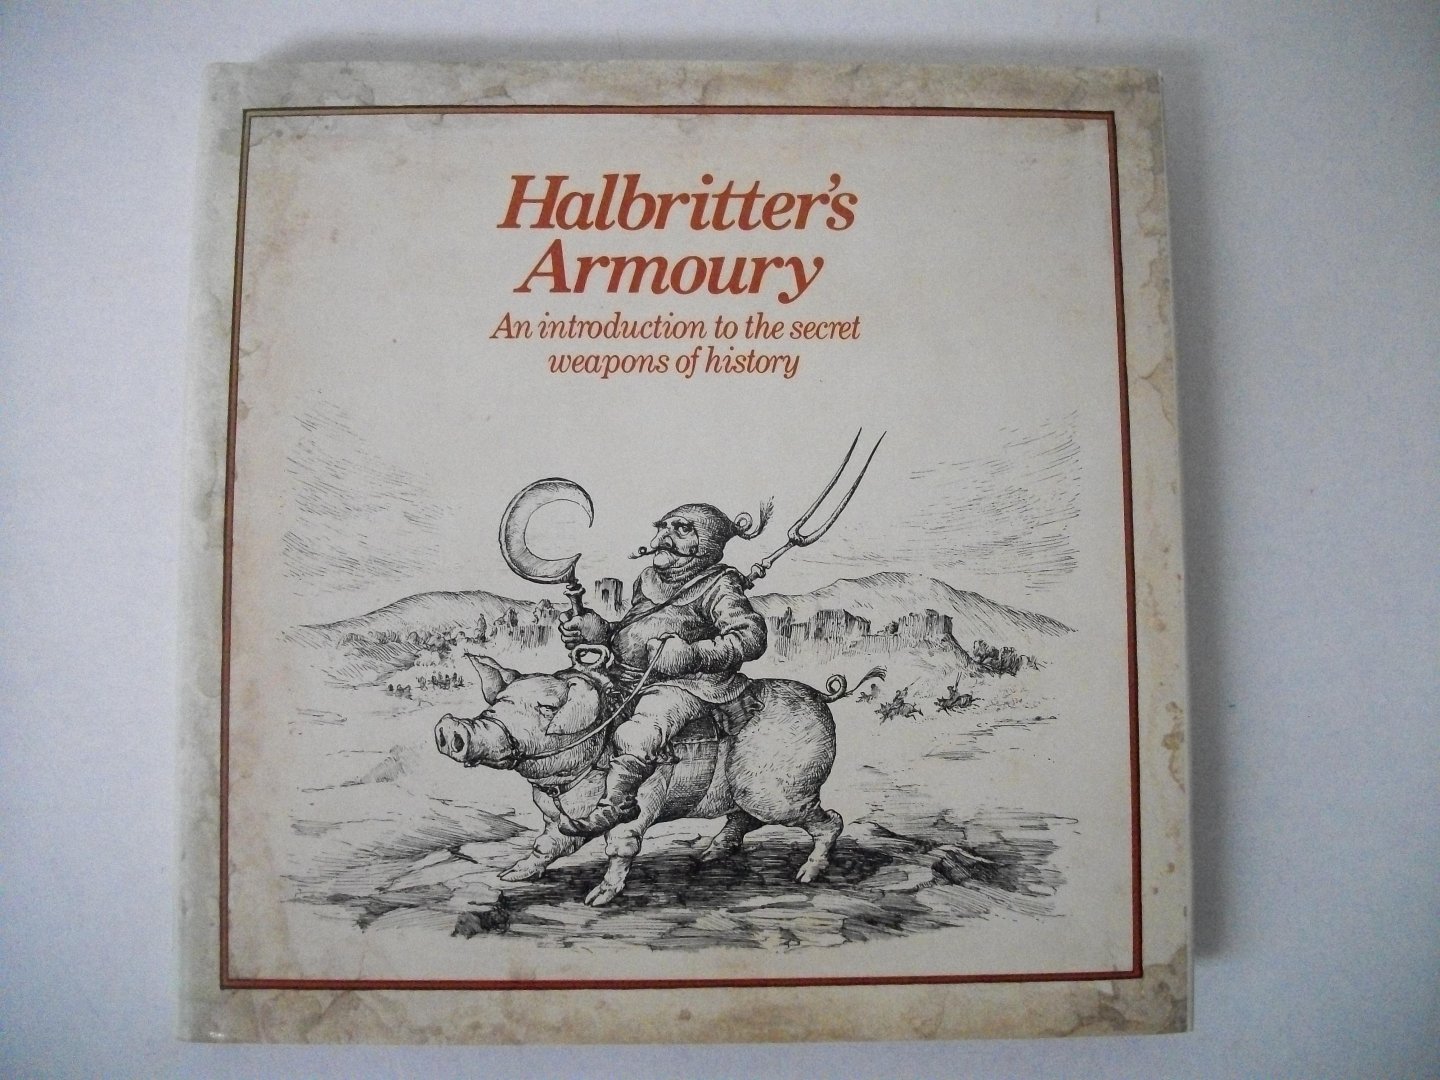 Halbritter, Kurt - Halbritter's Armoury; An introduction to the secret weapons of history